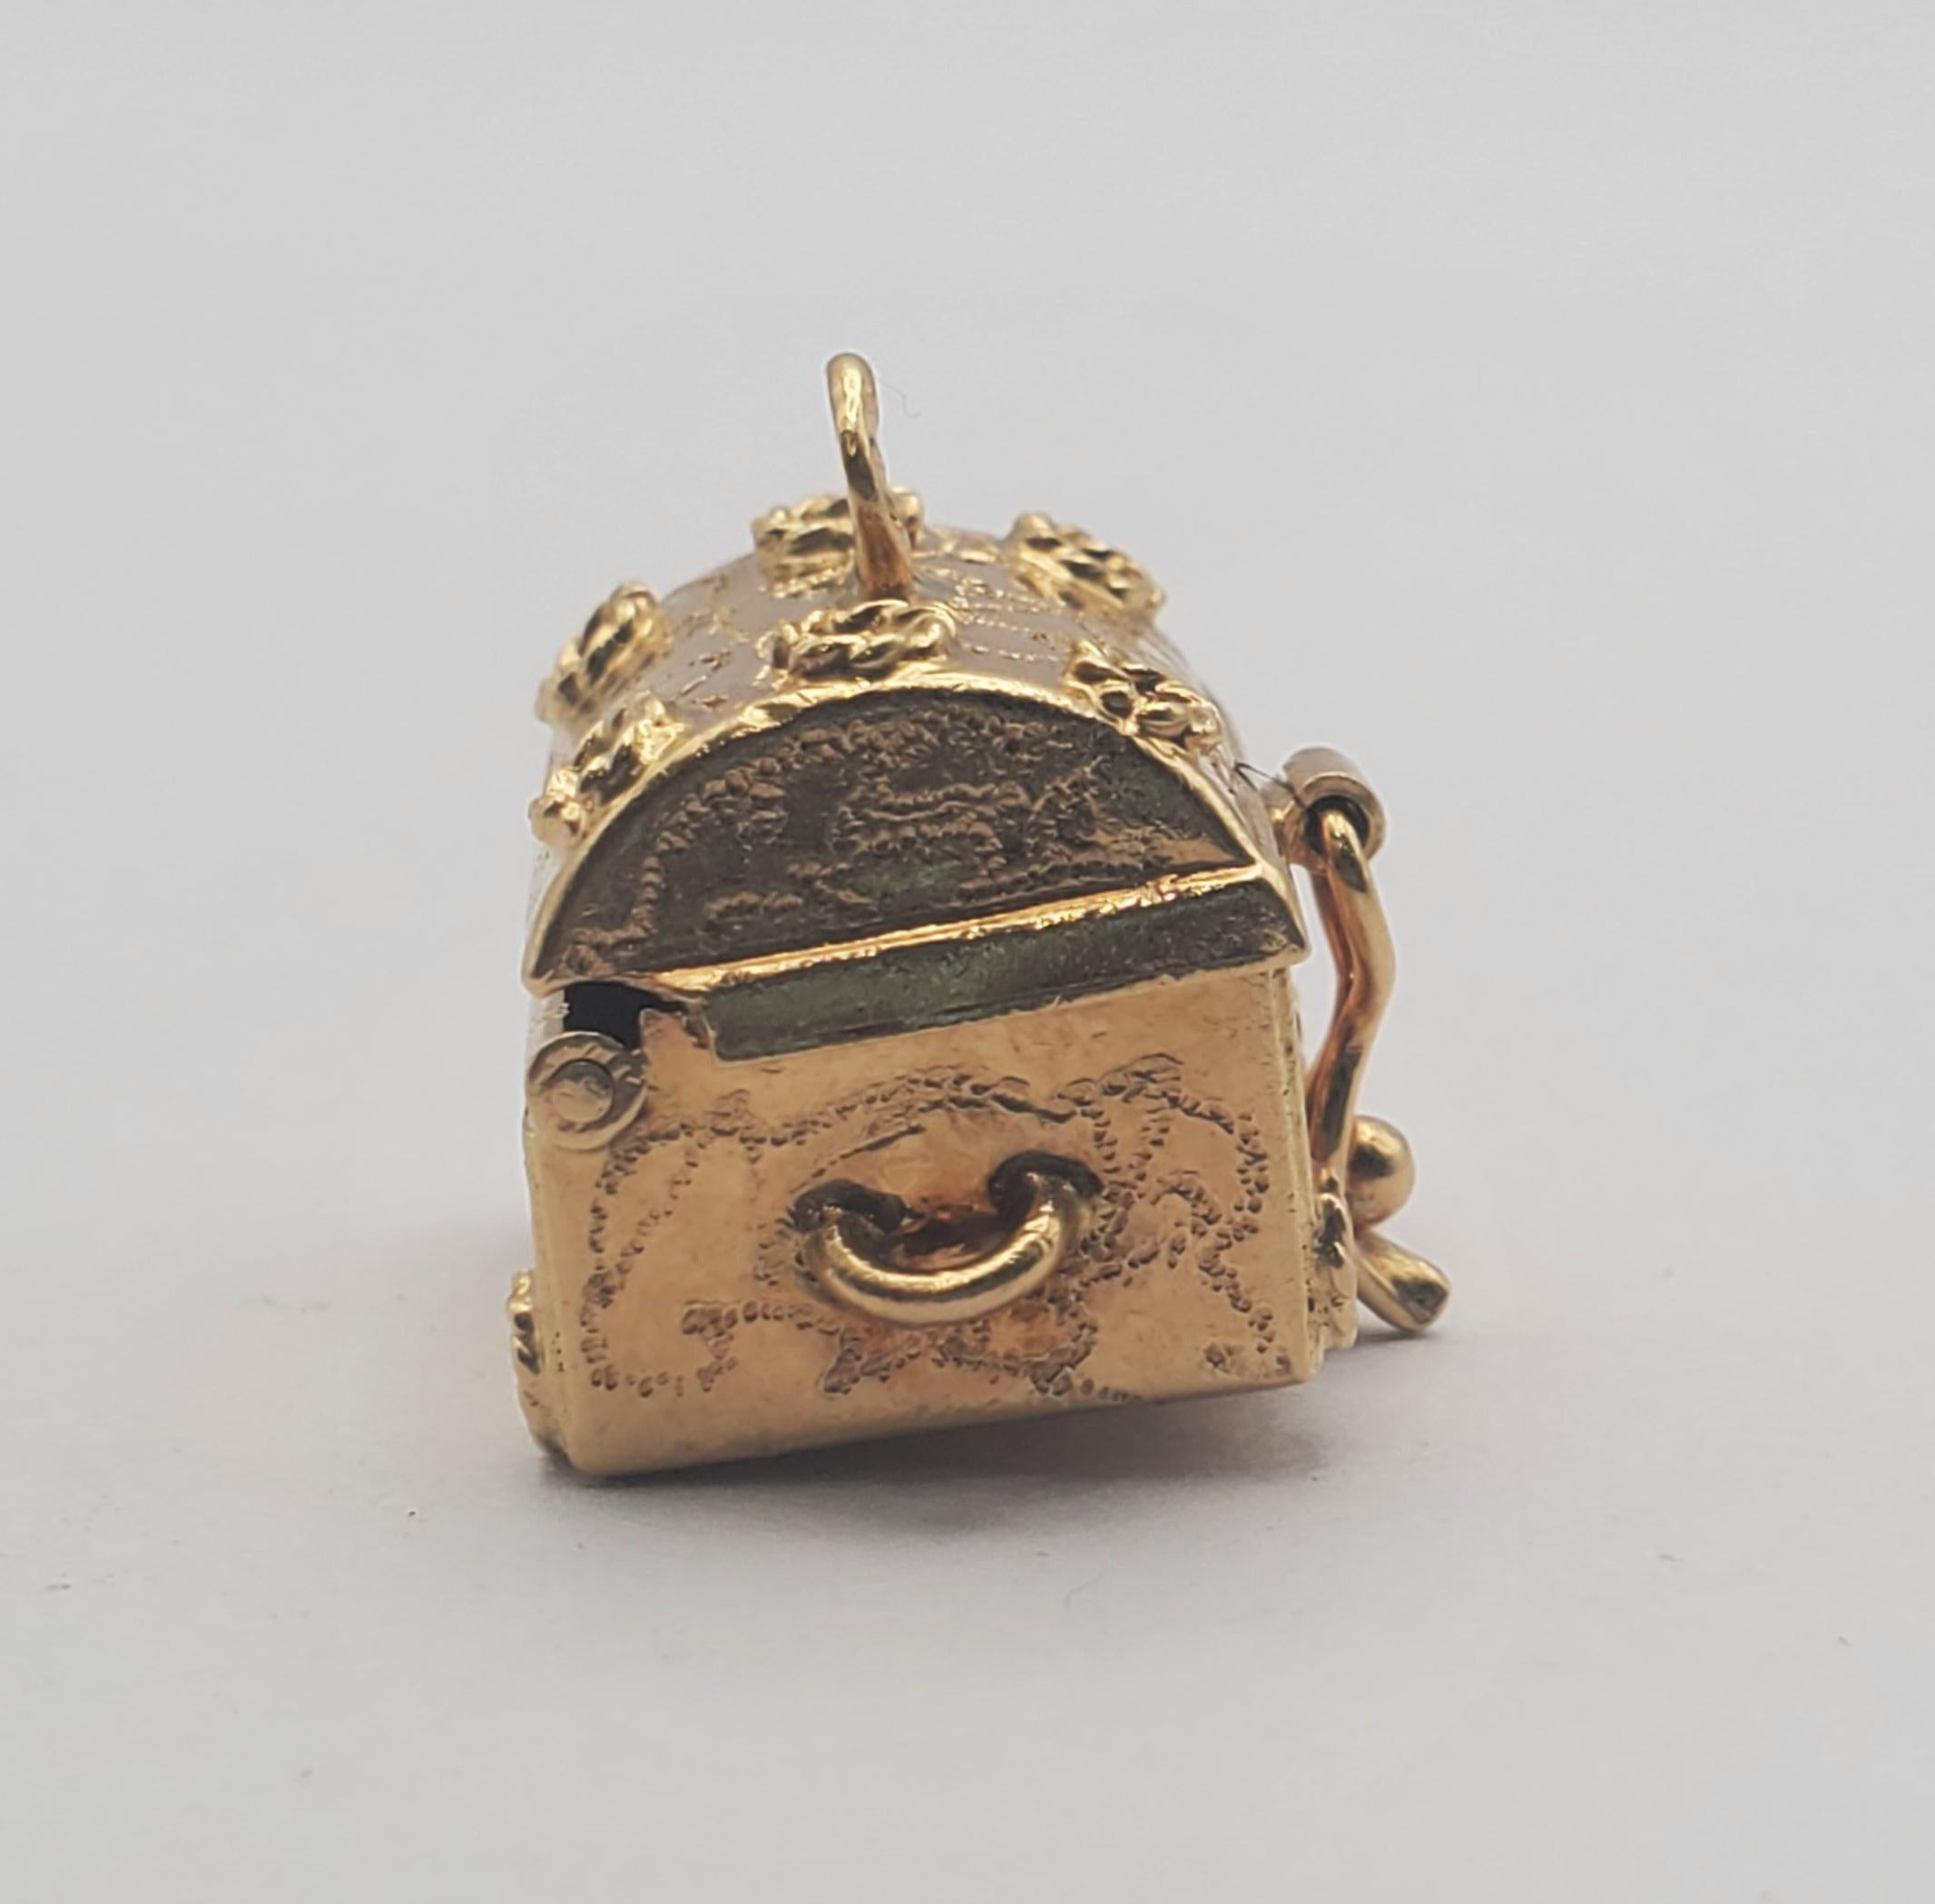 Beautiful vintage treasure chest charm/pendant featuring hidden pearl treasure inside. The chest is hinged and has a figure eight system to hold it closed. The bottom is engraved with the date 12-25-66. This chest would make an adorable pendant or